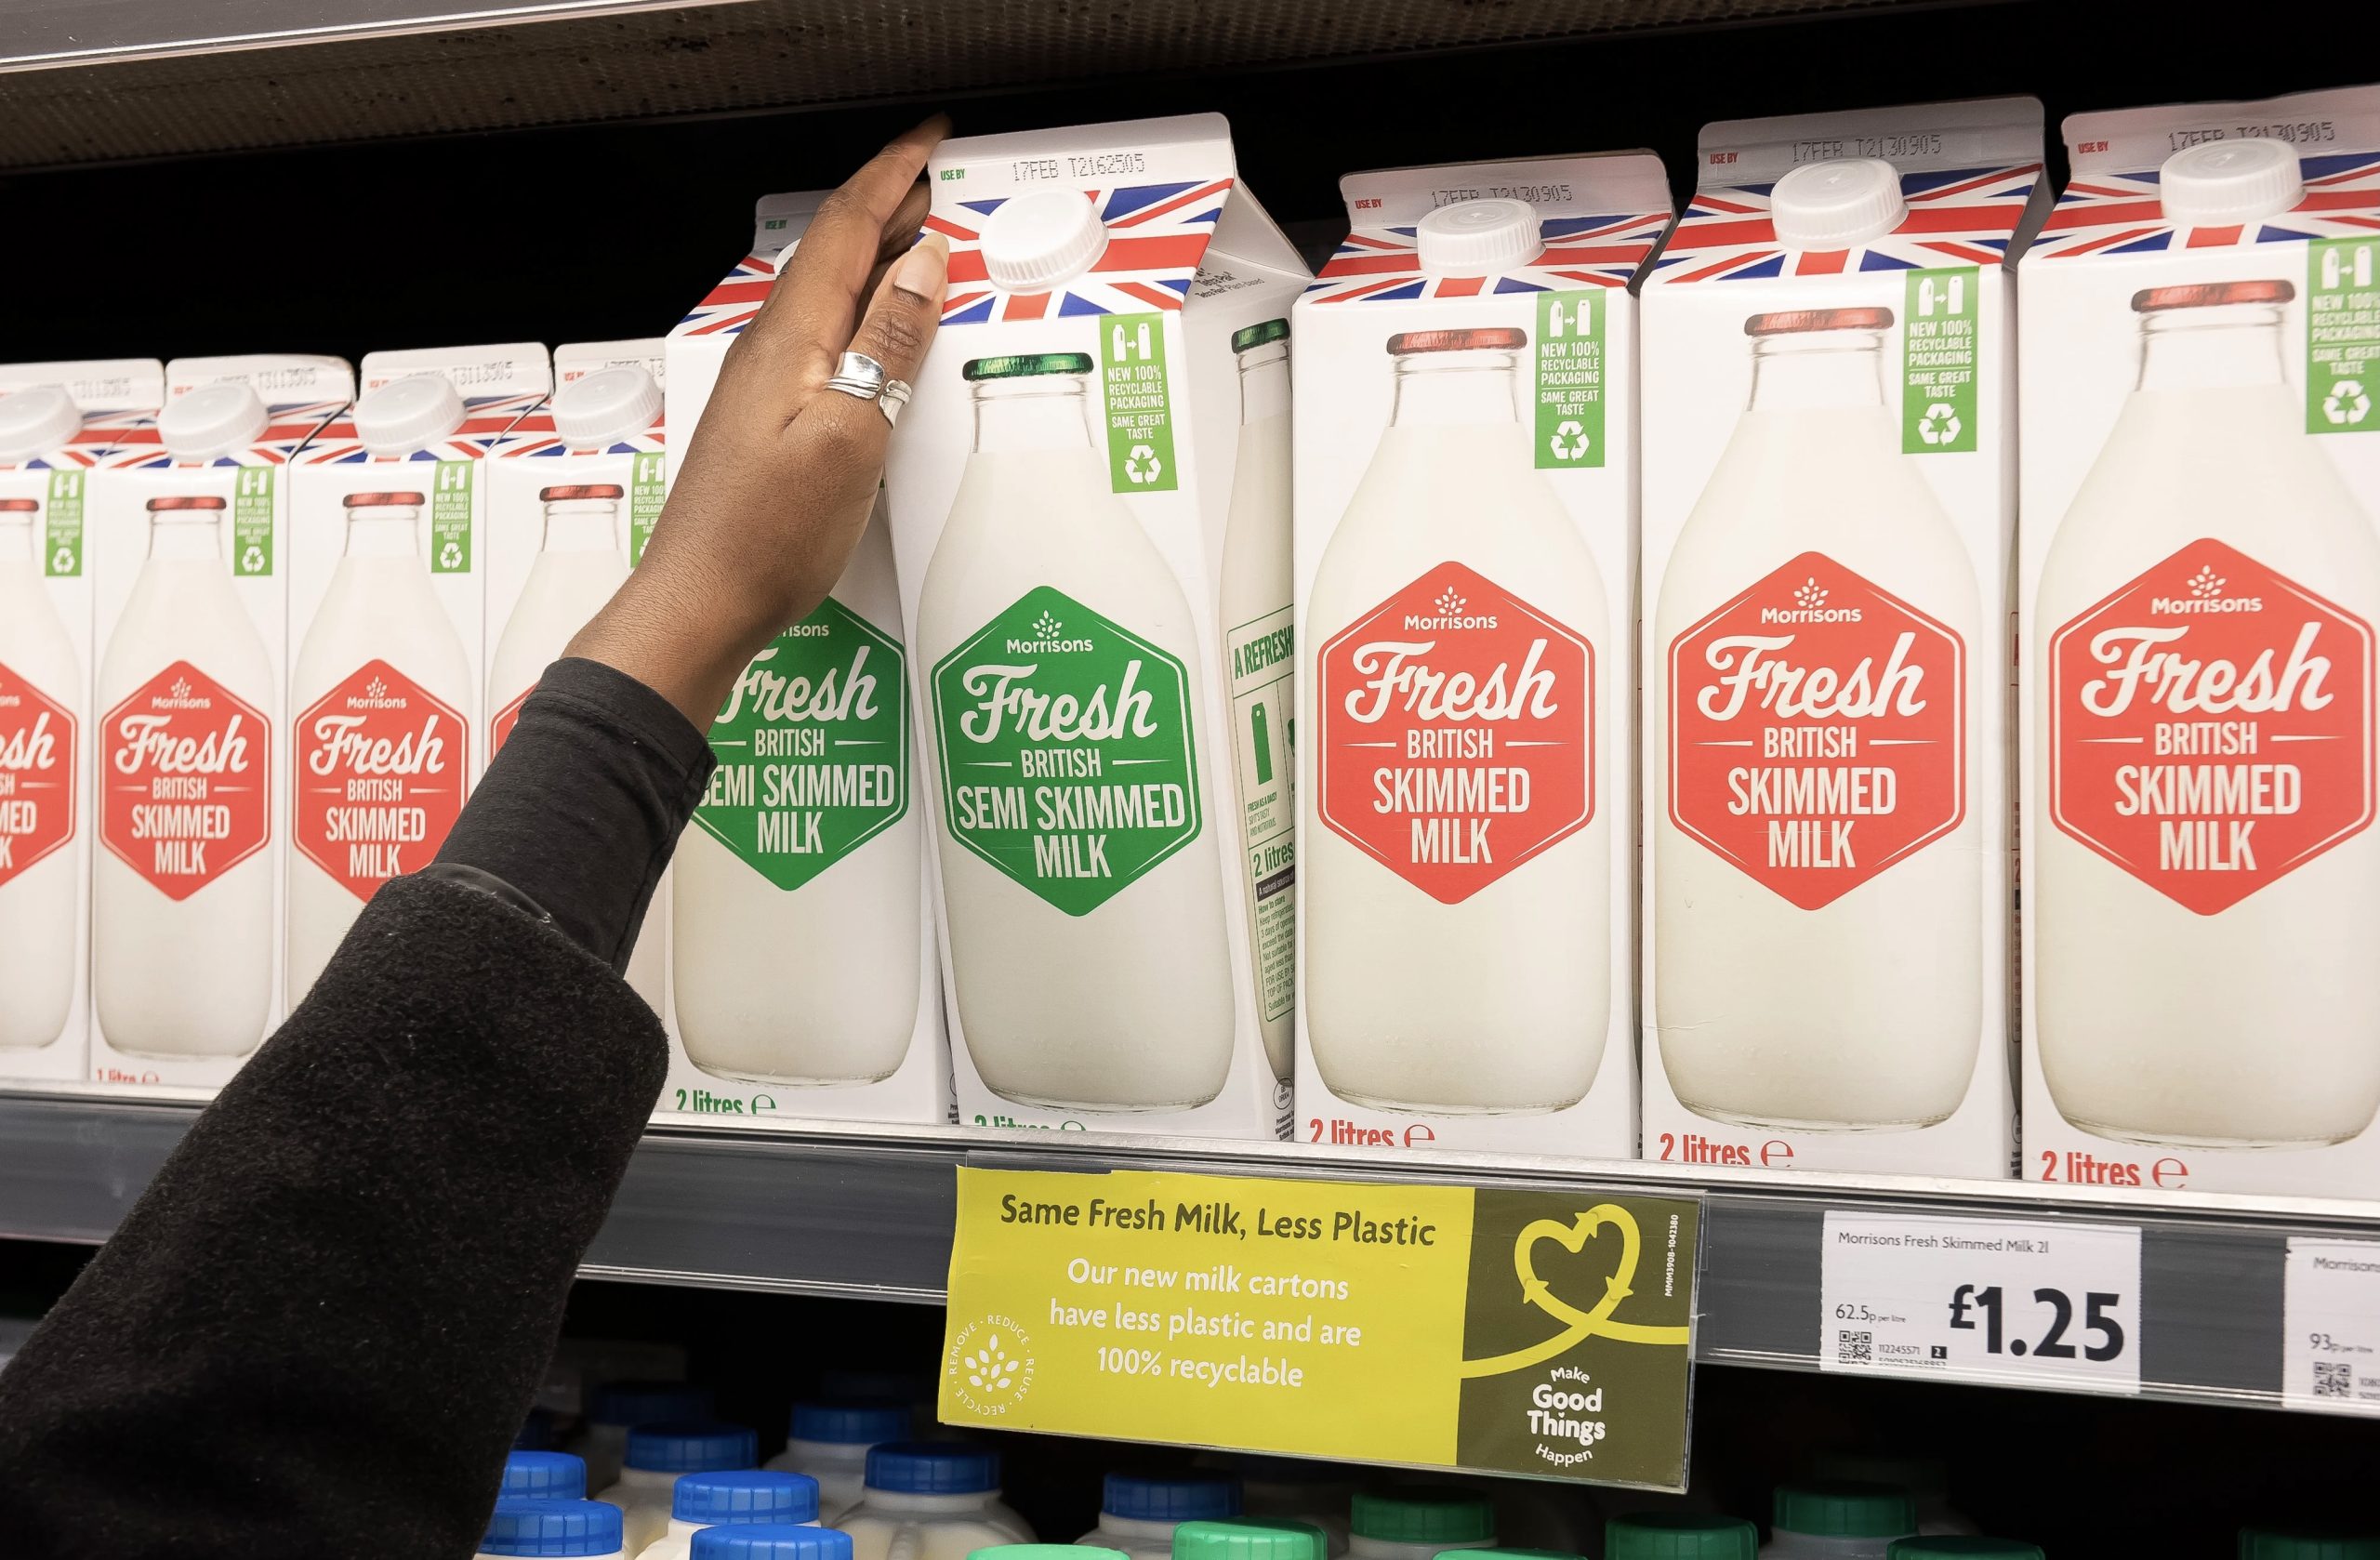 NEWS | Morrisons to switch own brand Fresh Milk to Cartons to reduce plastics and carbon emissions